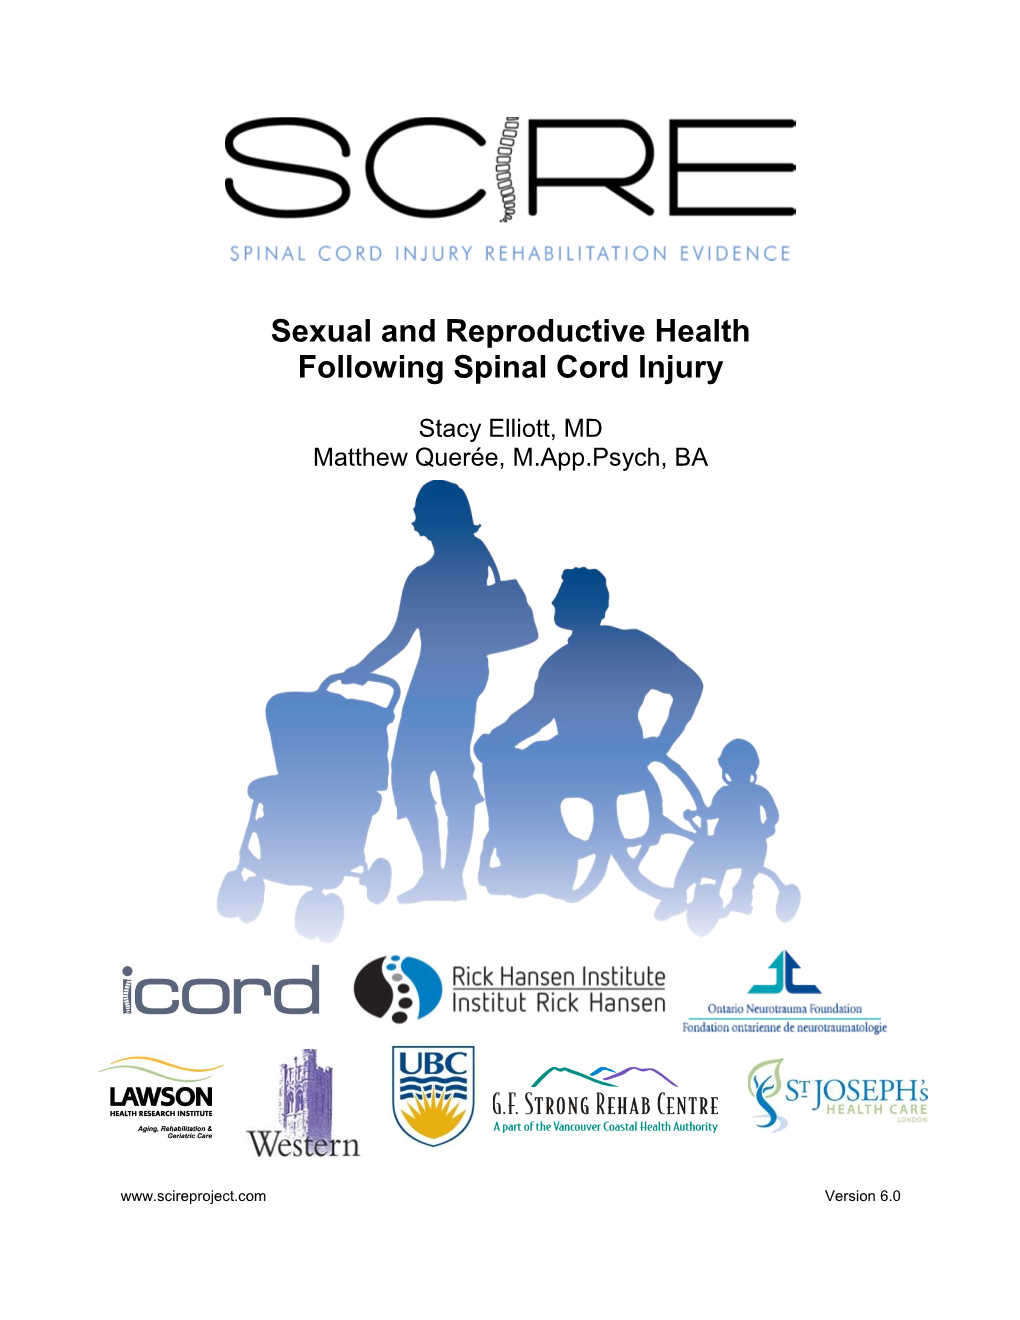 Sexual and Reproductive Health Following Spinal Cord Injury